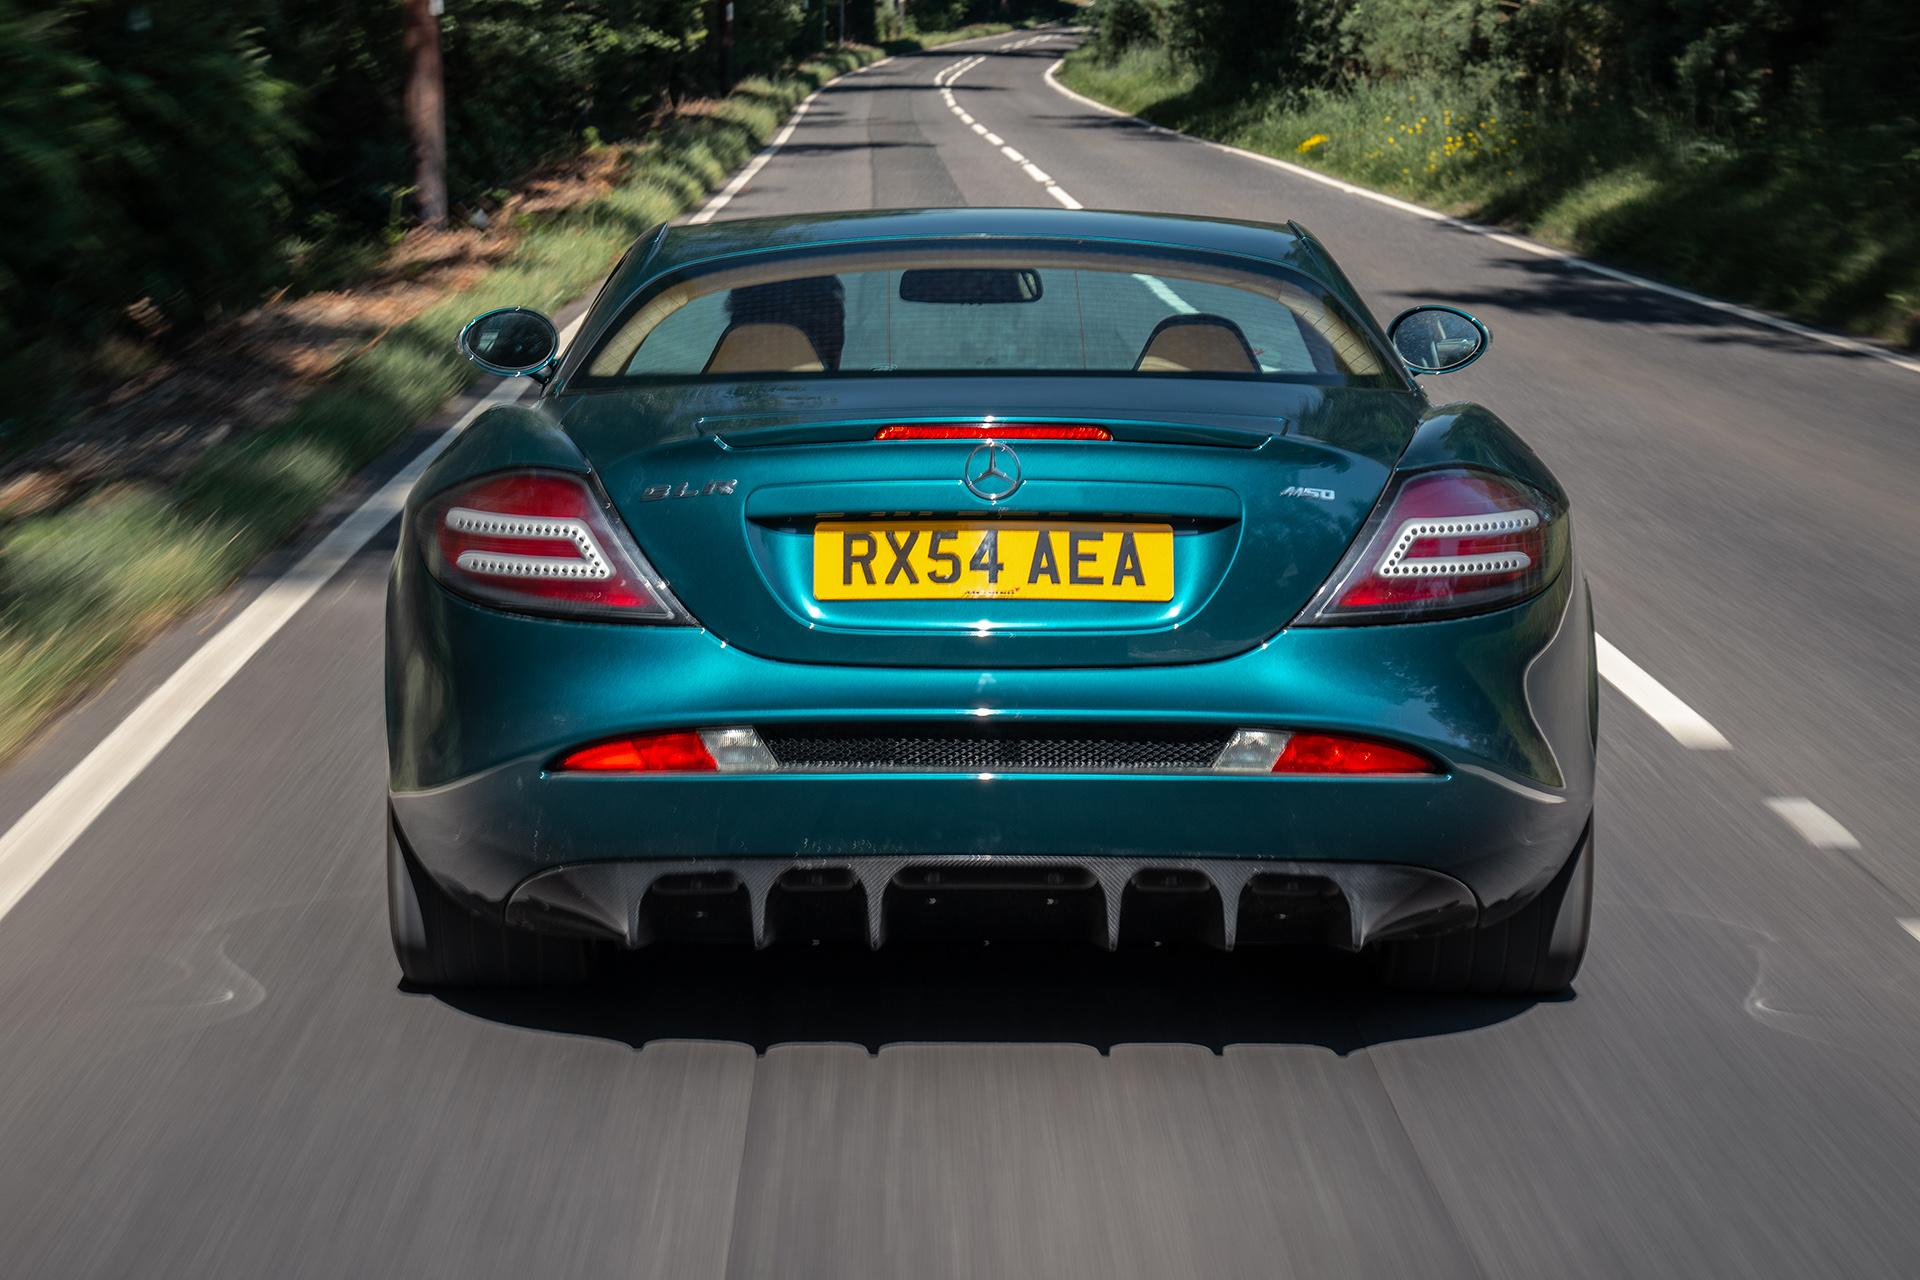 Mercedes SLR McLaren driving on the road behind